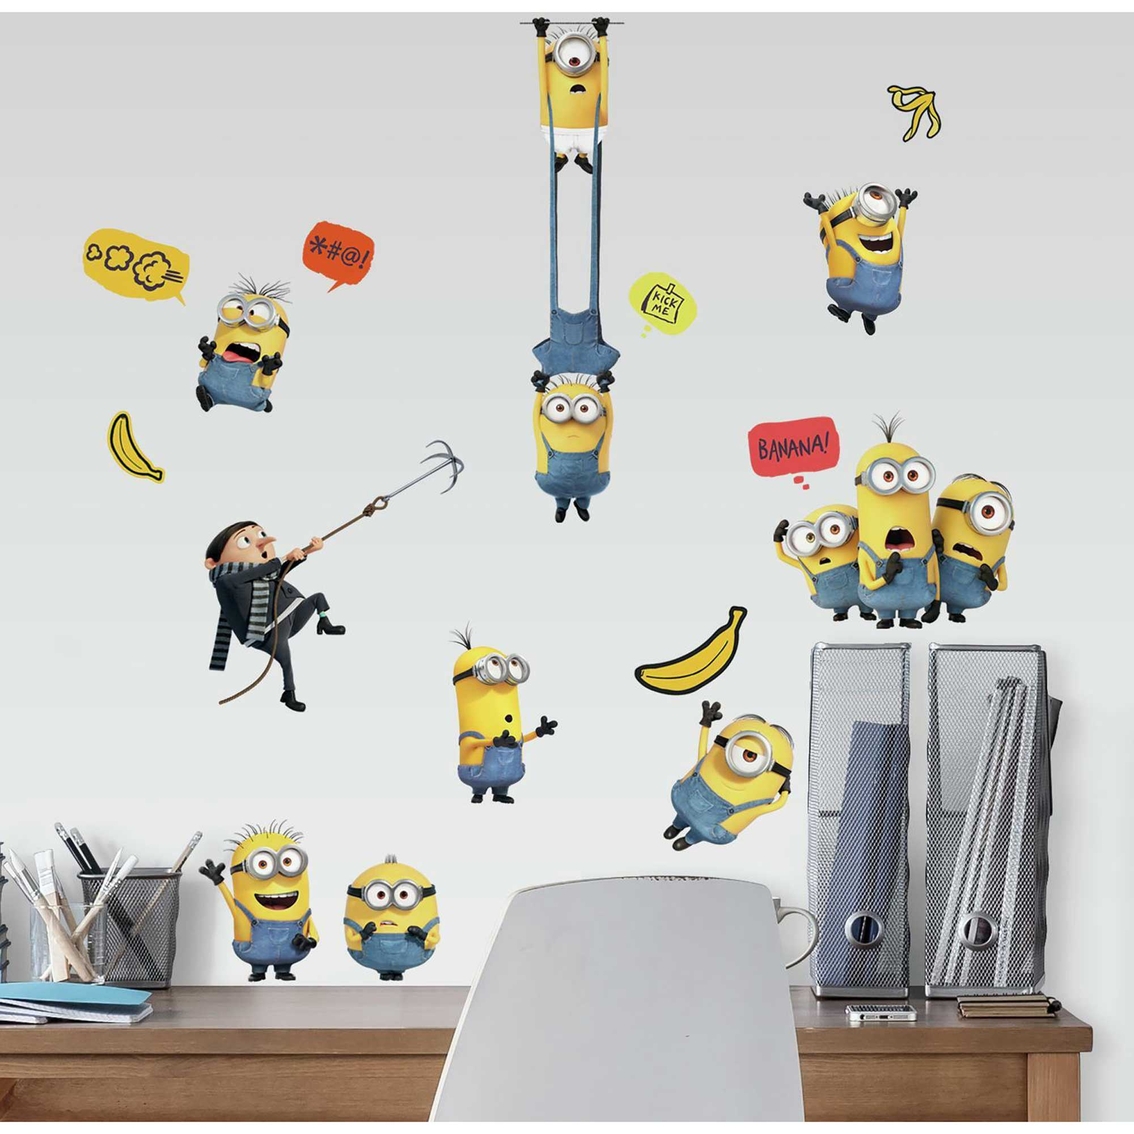 RoomMates Minions 2 Peel & Stick Wall Decals - Image 4 of 6